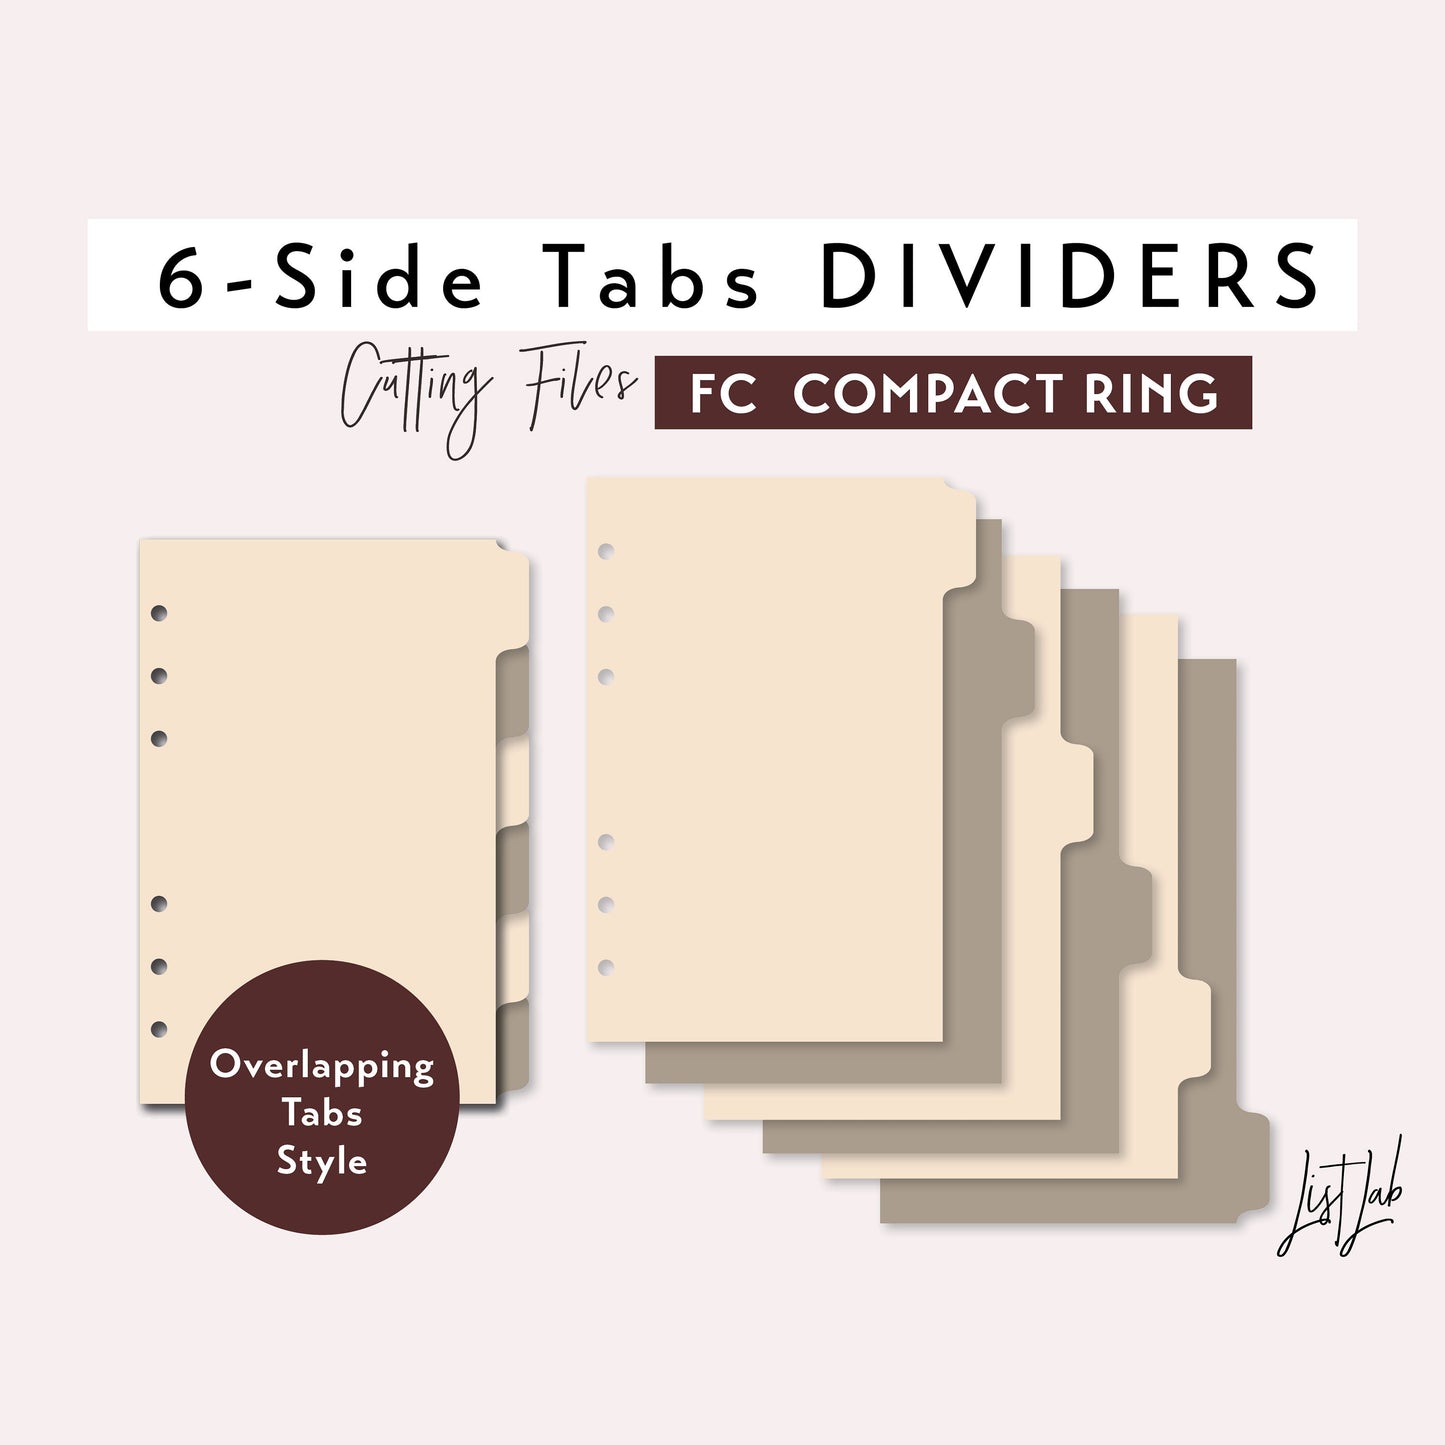 FC Compact Ring 6-SIDE Tab Dividers Cutting Files Set